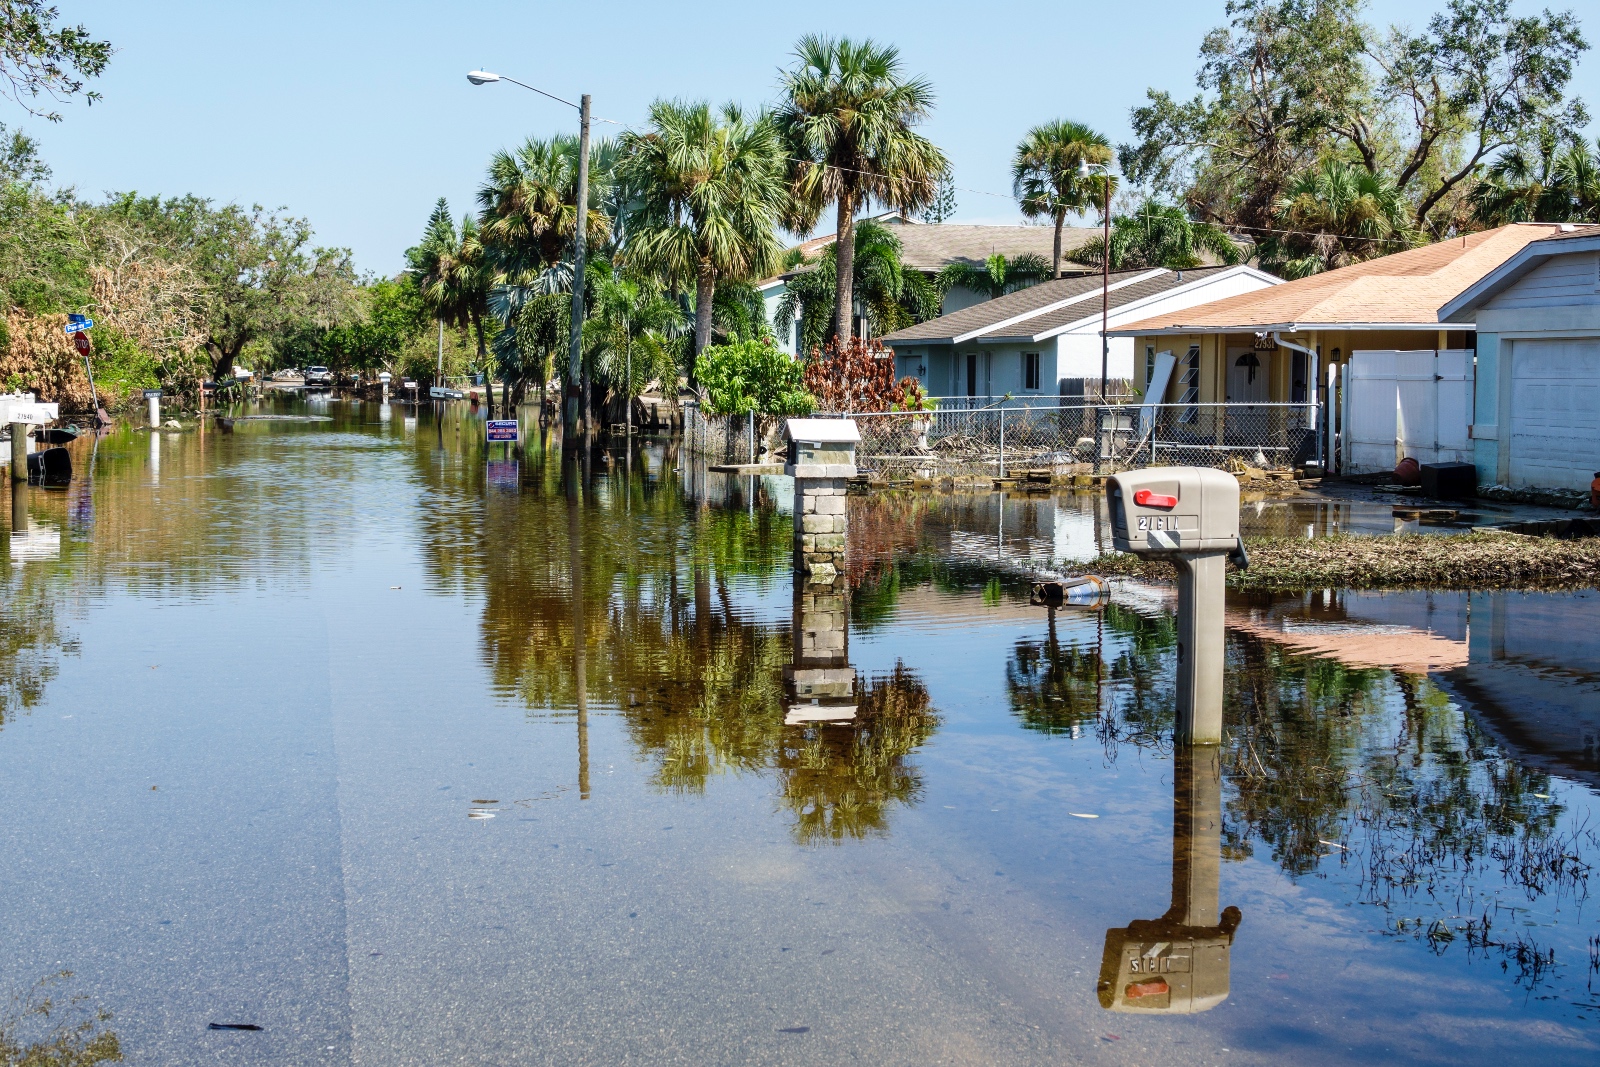 Row of low-lying houses under palm trees with mailboxes reflected in floodwaters